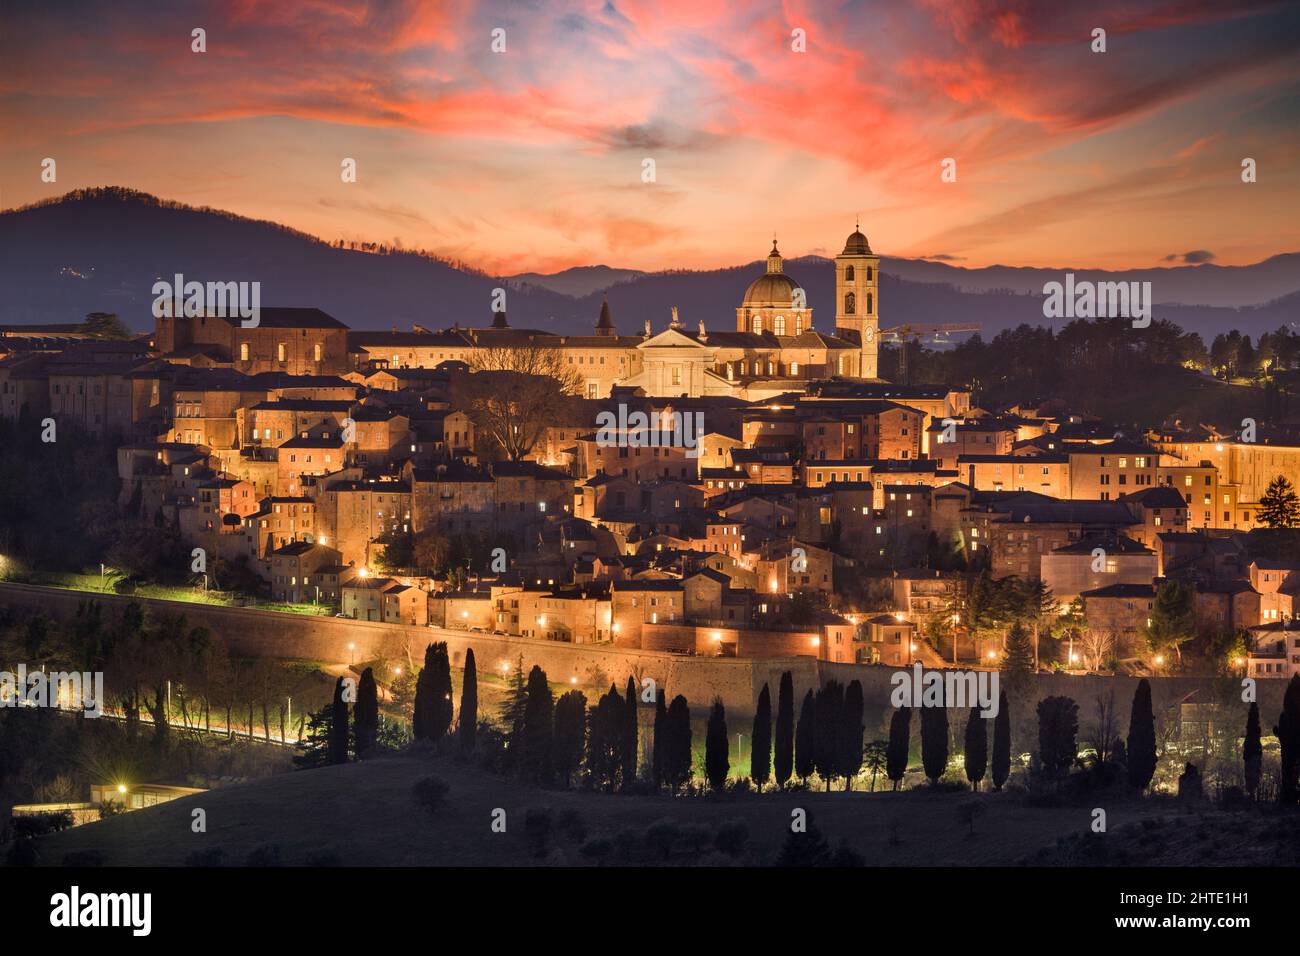 Urbino, Italy medieval walled city in the Marche region at twilight. Stock Photo